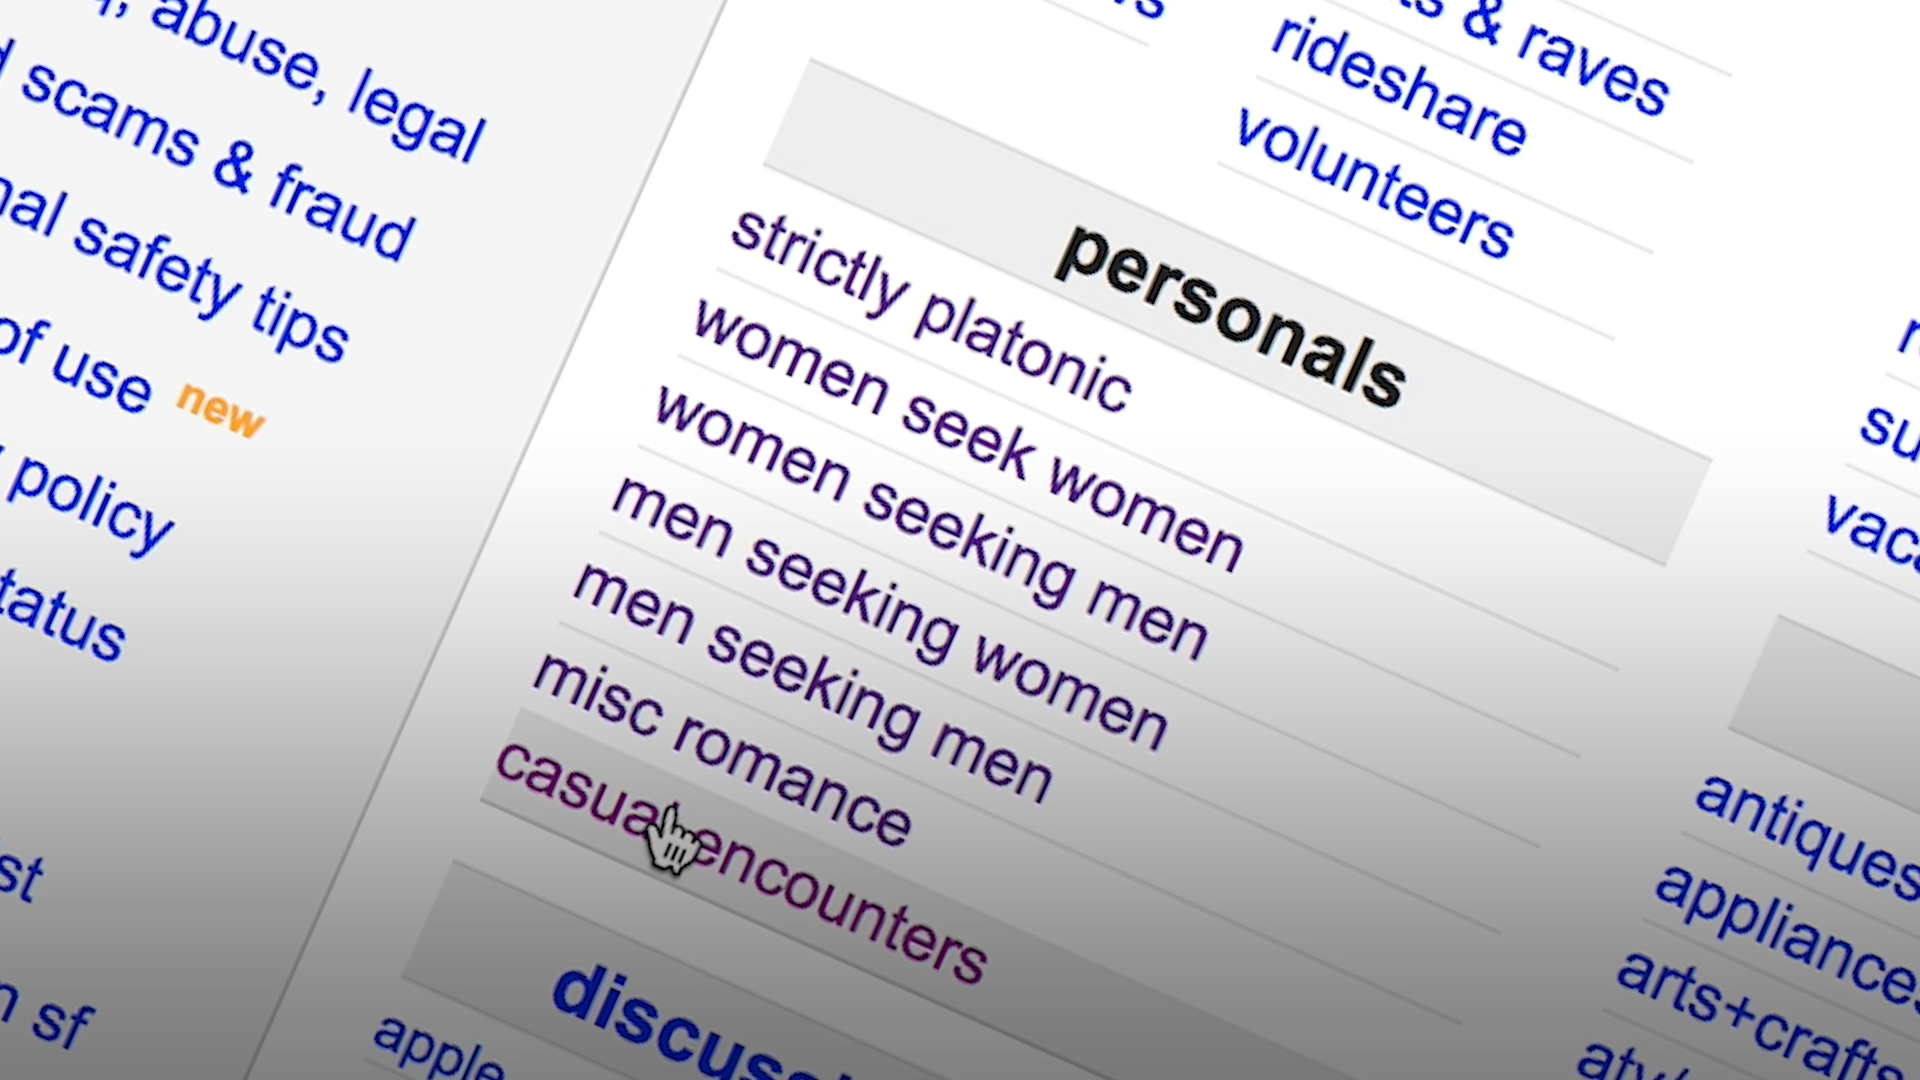 Personal ad features on craigslist w4m